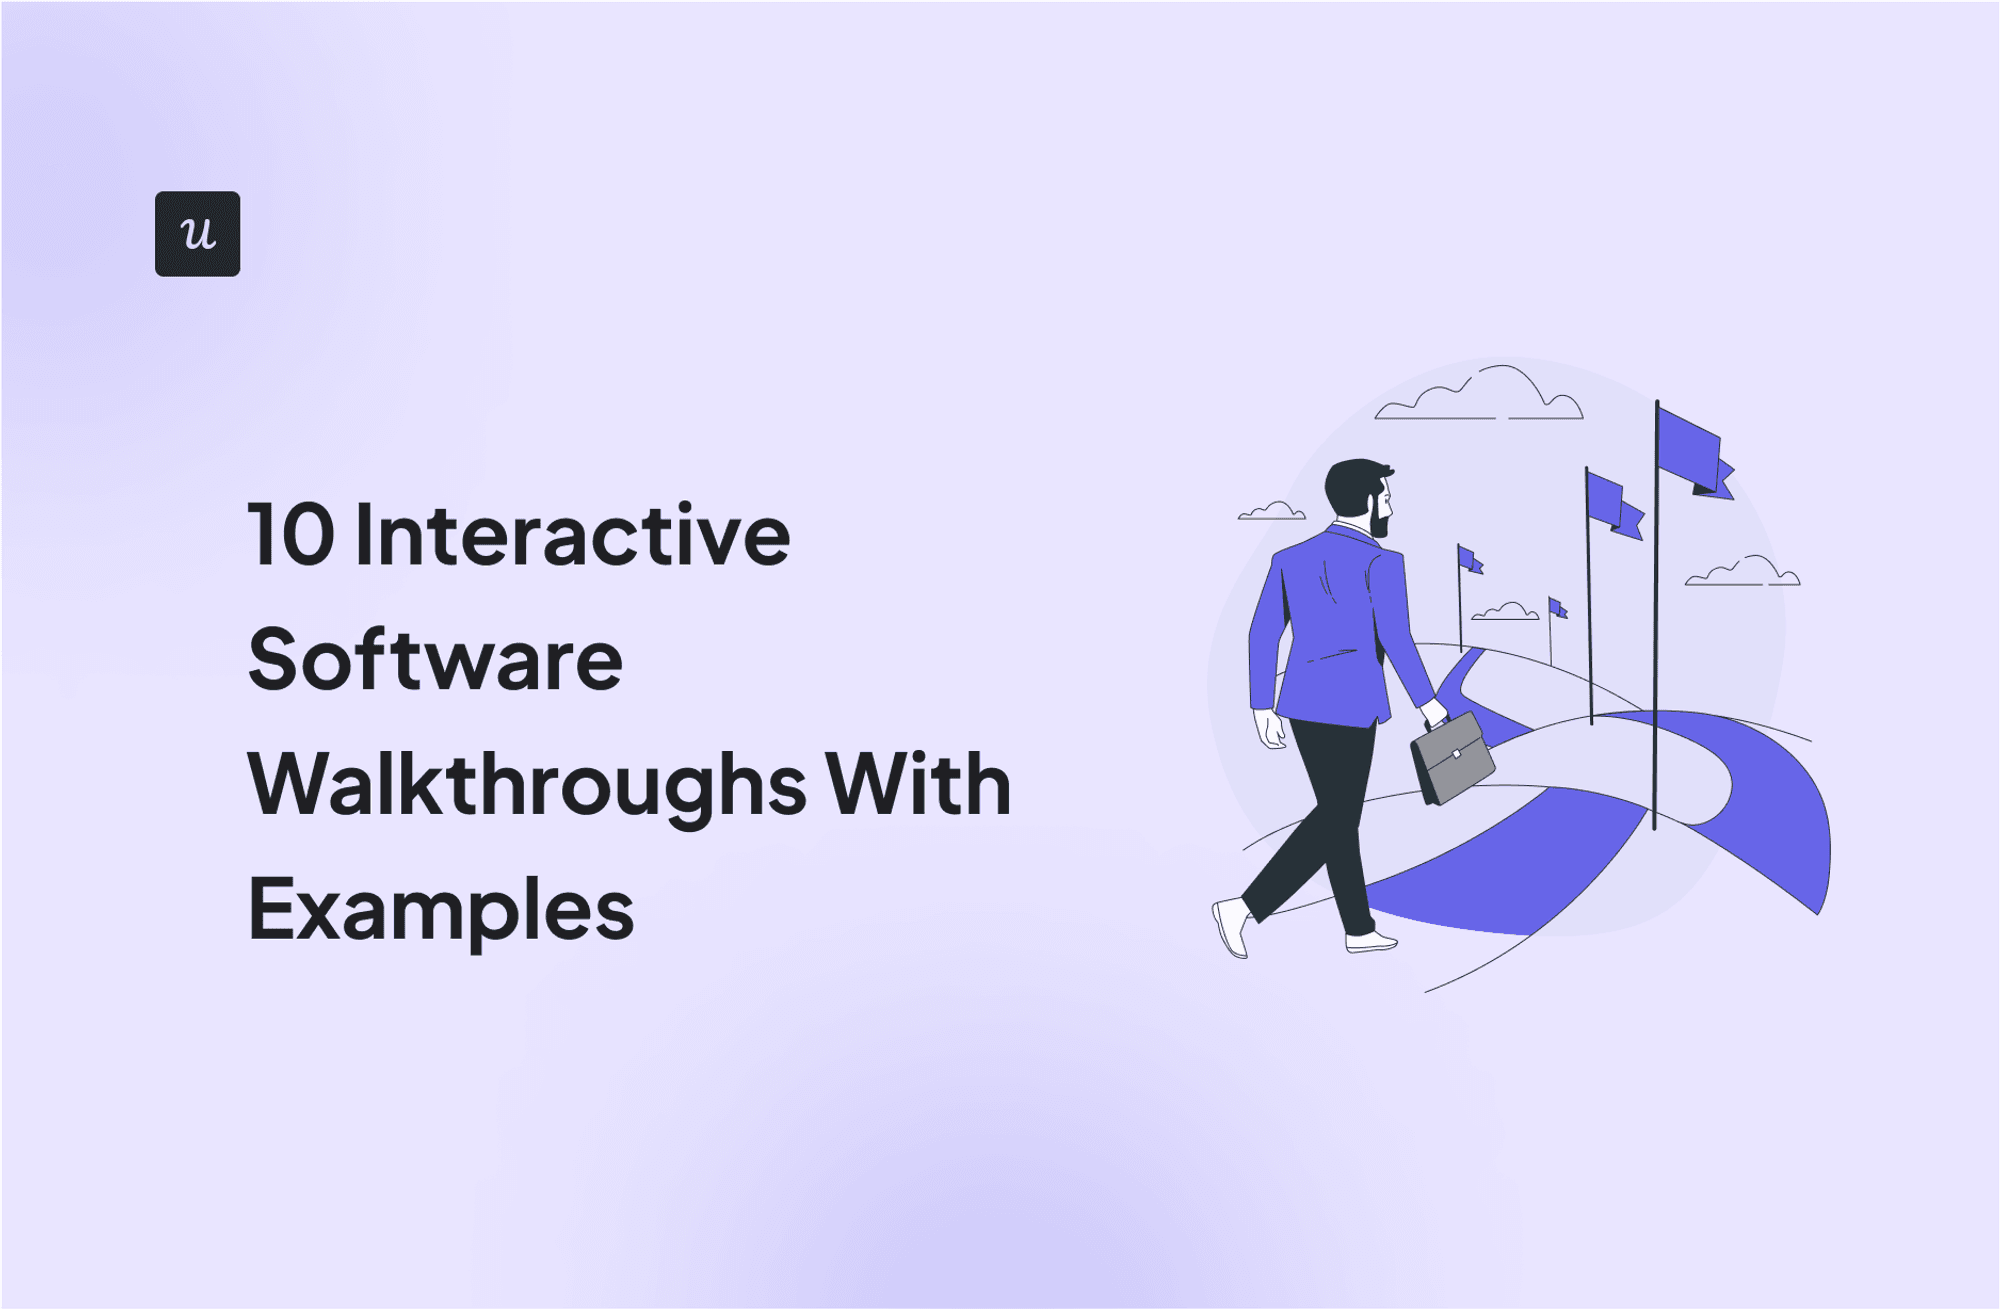 10 Interactive Software Walkthroughs With Examples cover